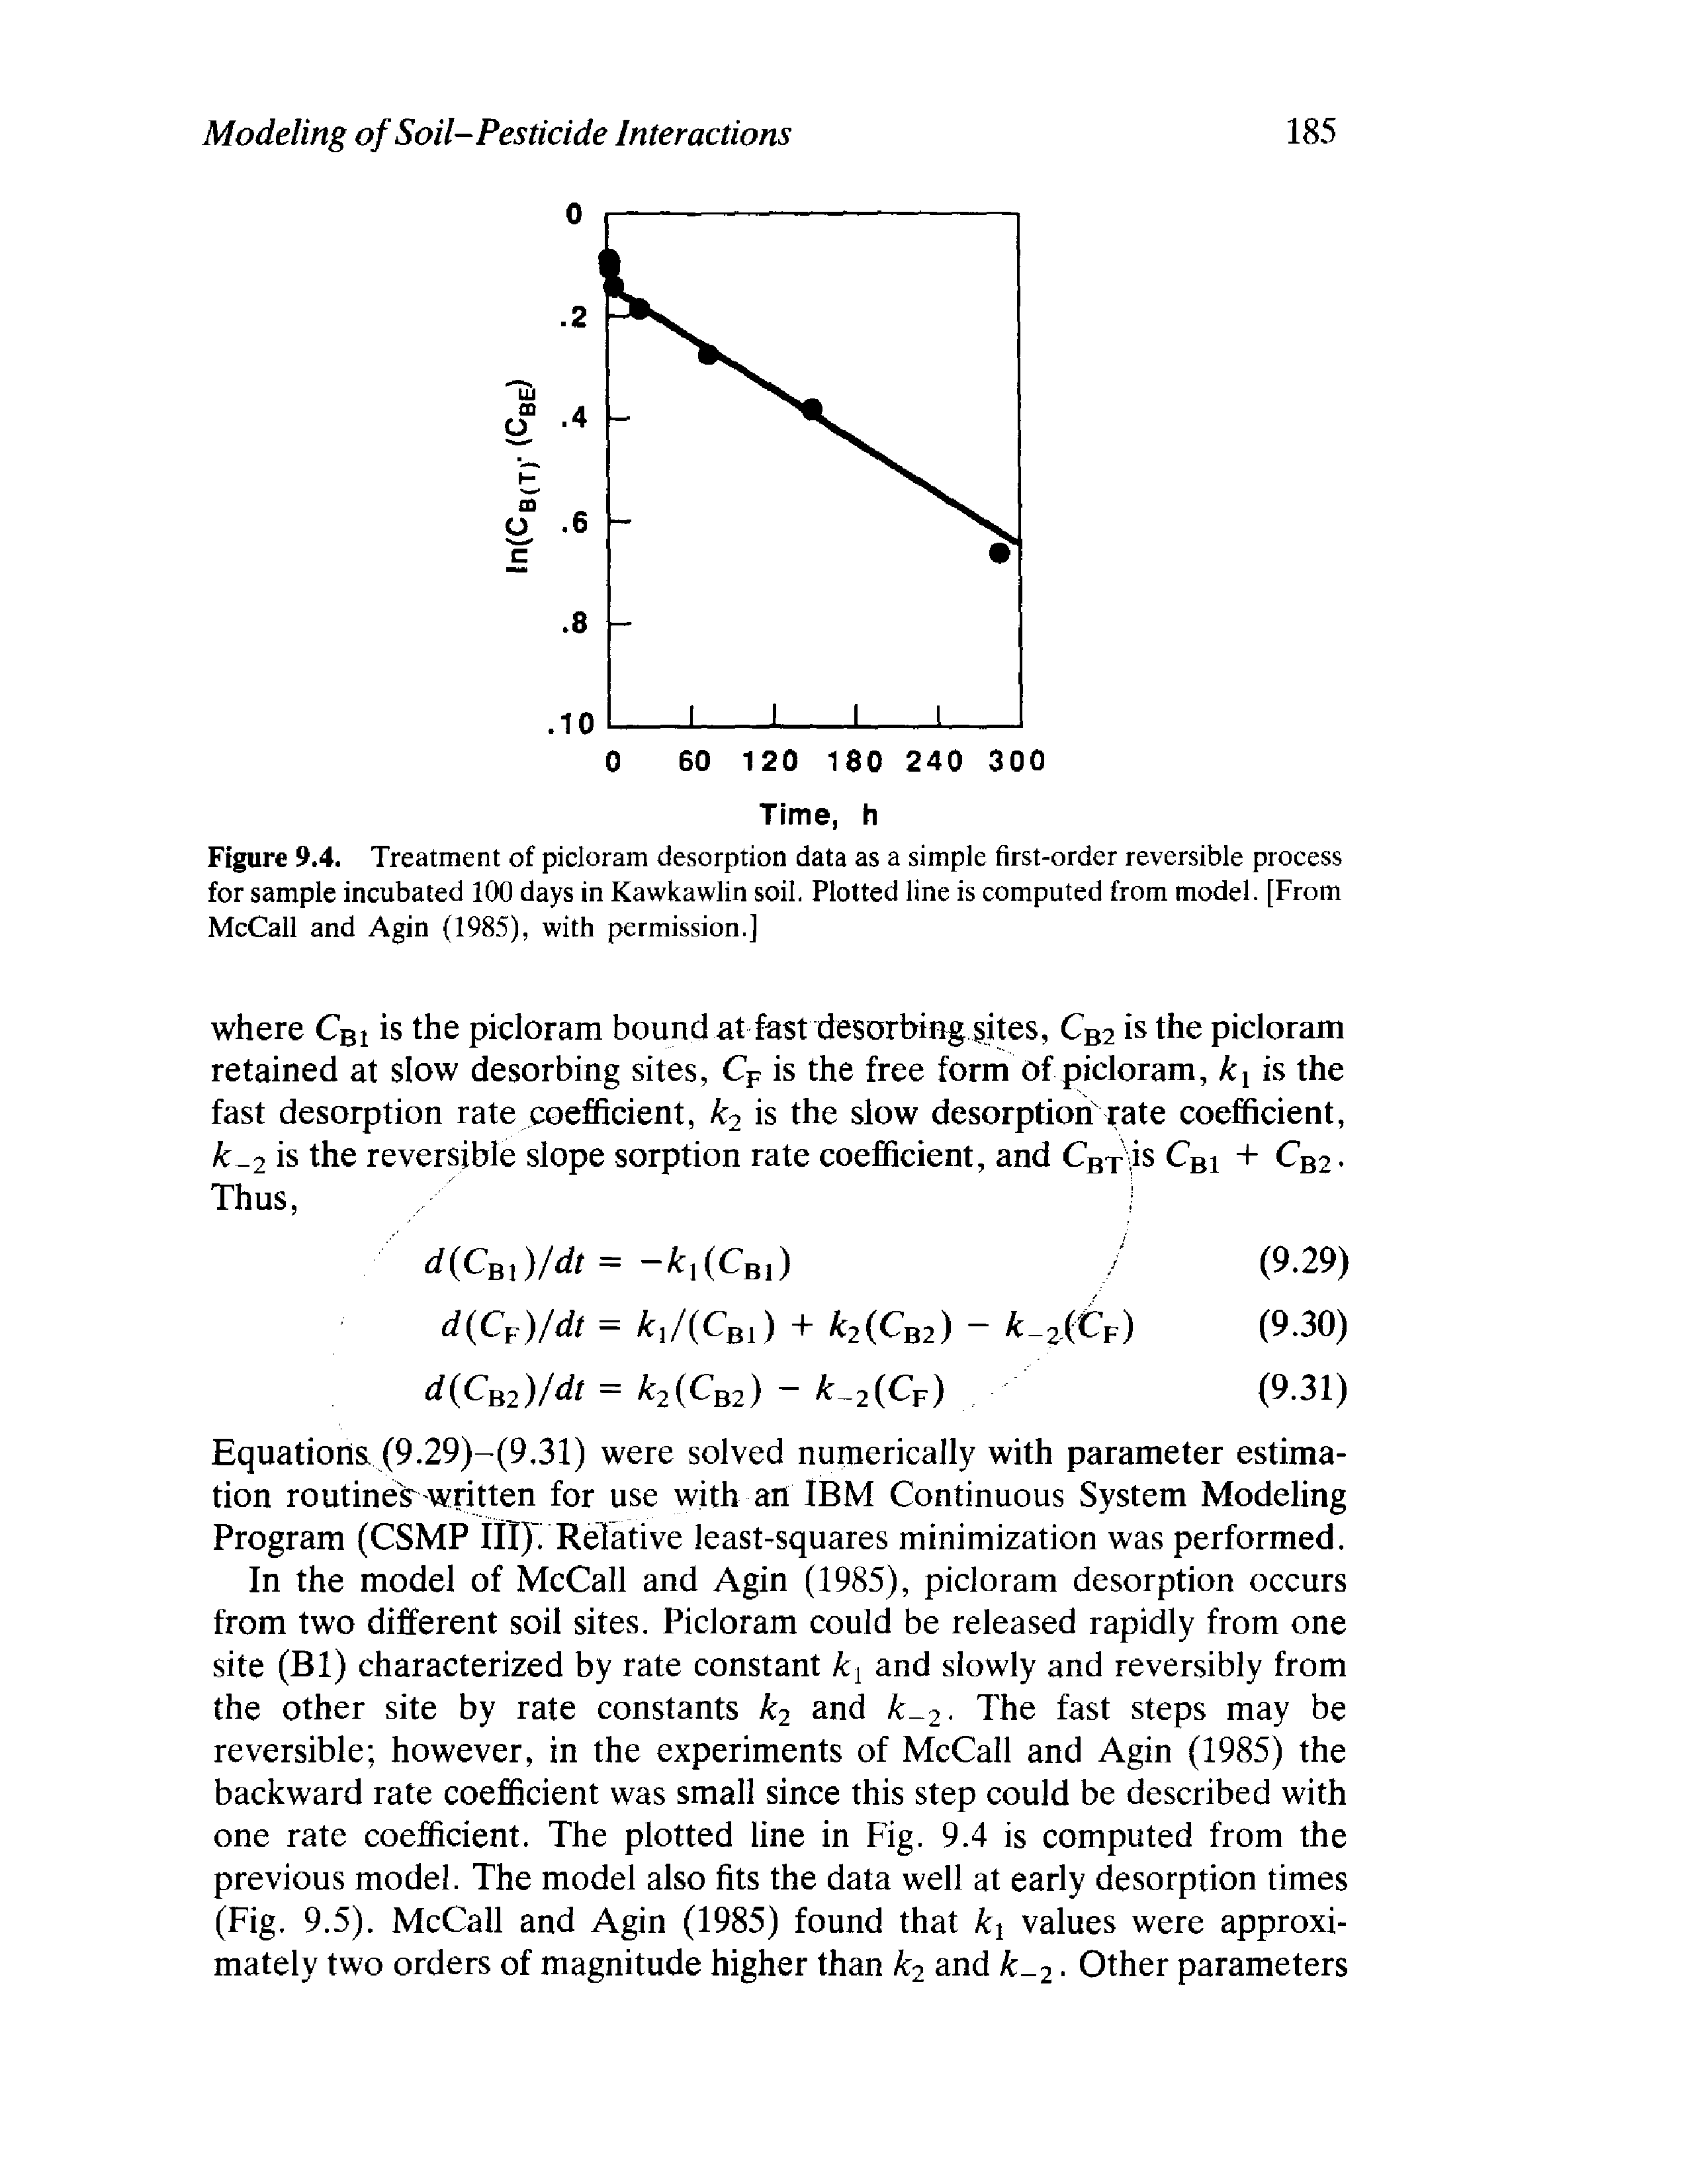 Figure 9.4. Treatment of picloram desorption data as a simple first-order reversible process for sample incubated 100 days in Kawkawlin soil. Plotted line is computed from model. [From McCall and Agin (1985), with permission.]...